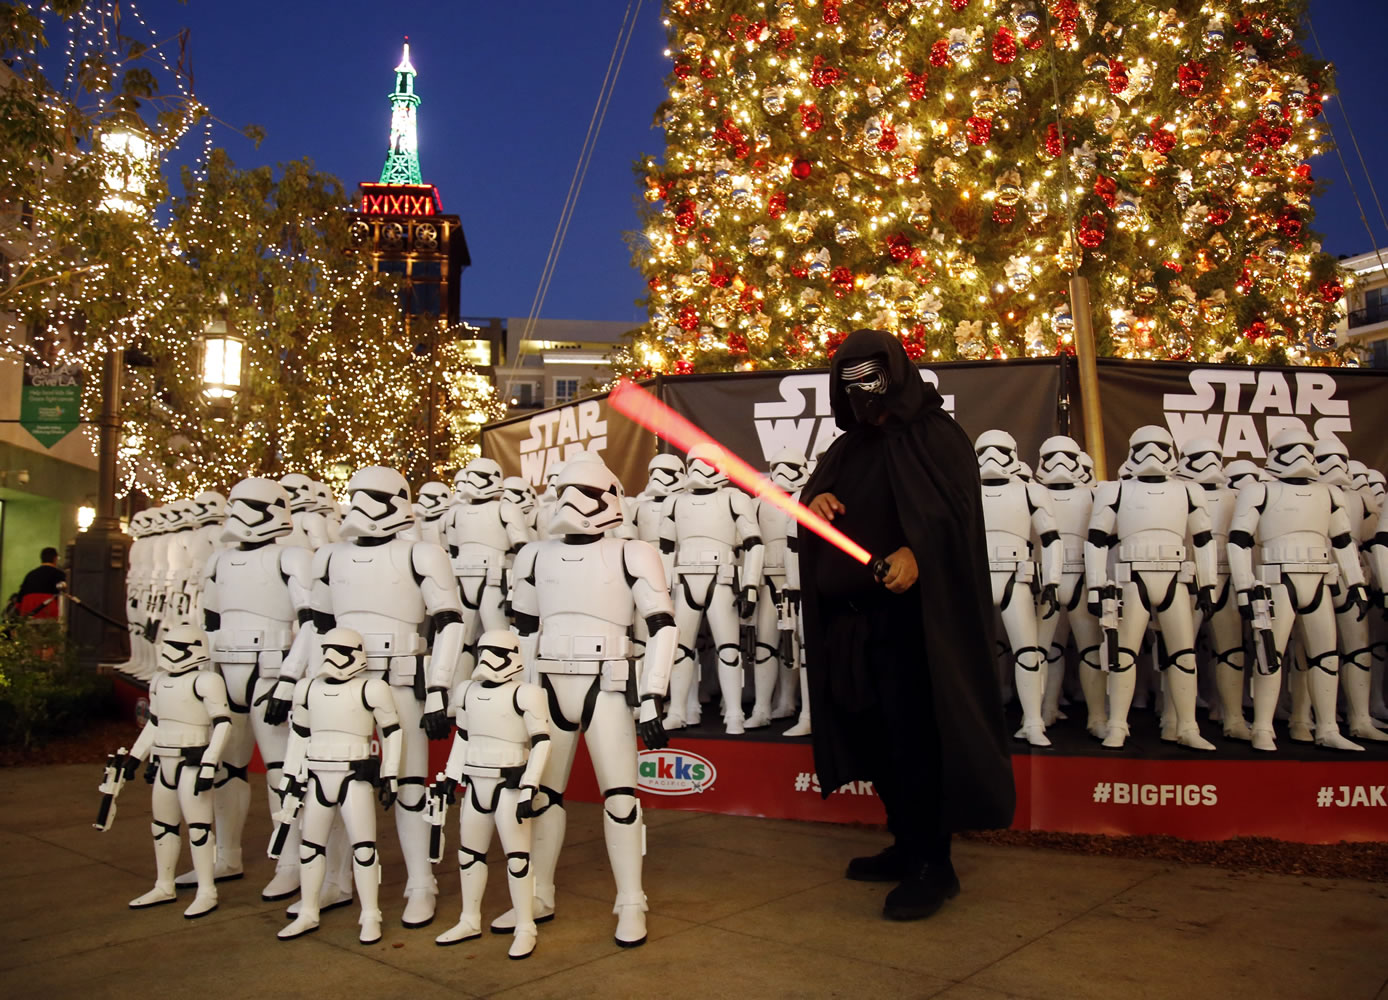 Isaac Islas from Eagle Rock, Calif. poses for a photo Thursday with more than 100 JAKKS BIG-FIGS Stormtrooper action figures as a part of an installation at The Americana at Brand for the opening of &quot;Star Wars: The Force Awakens&quot; in Glendale, Calif.